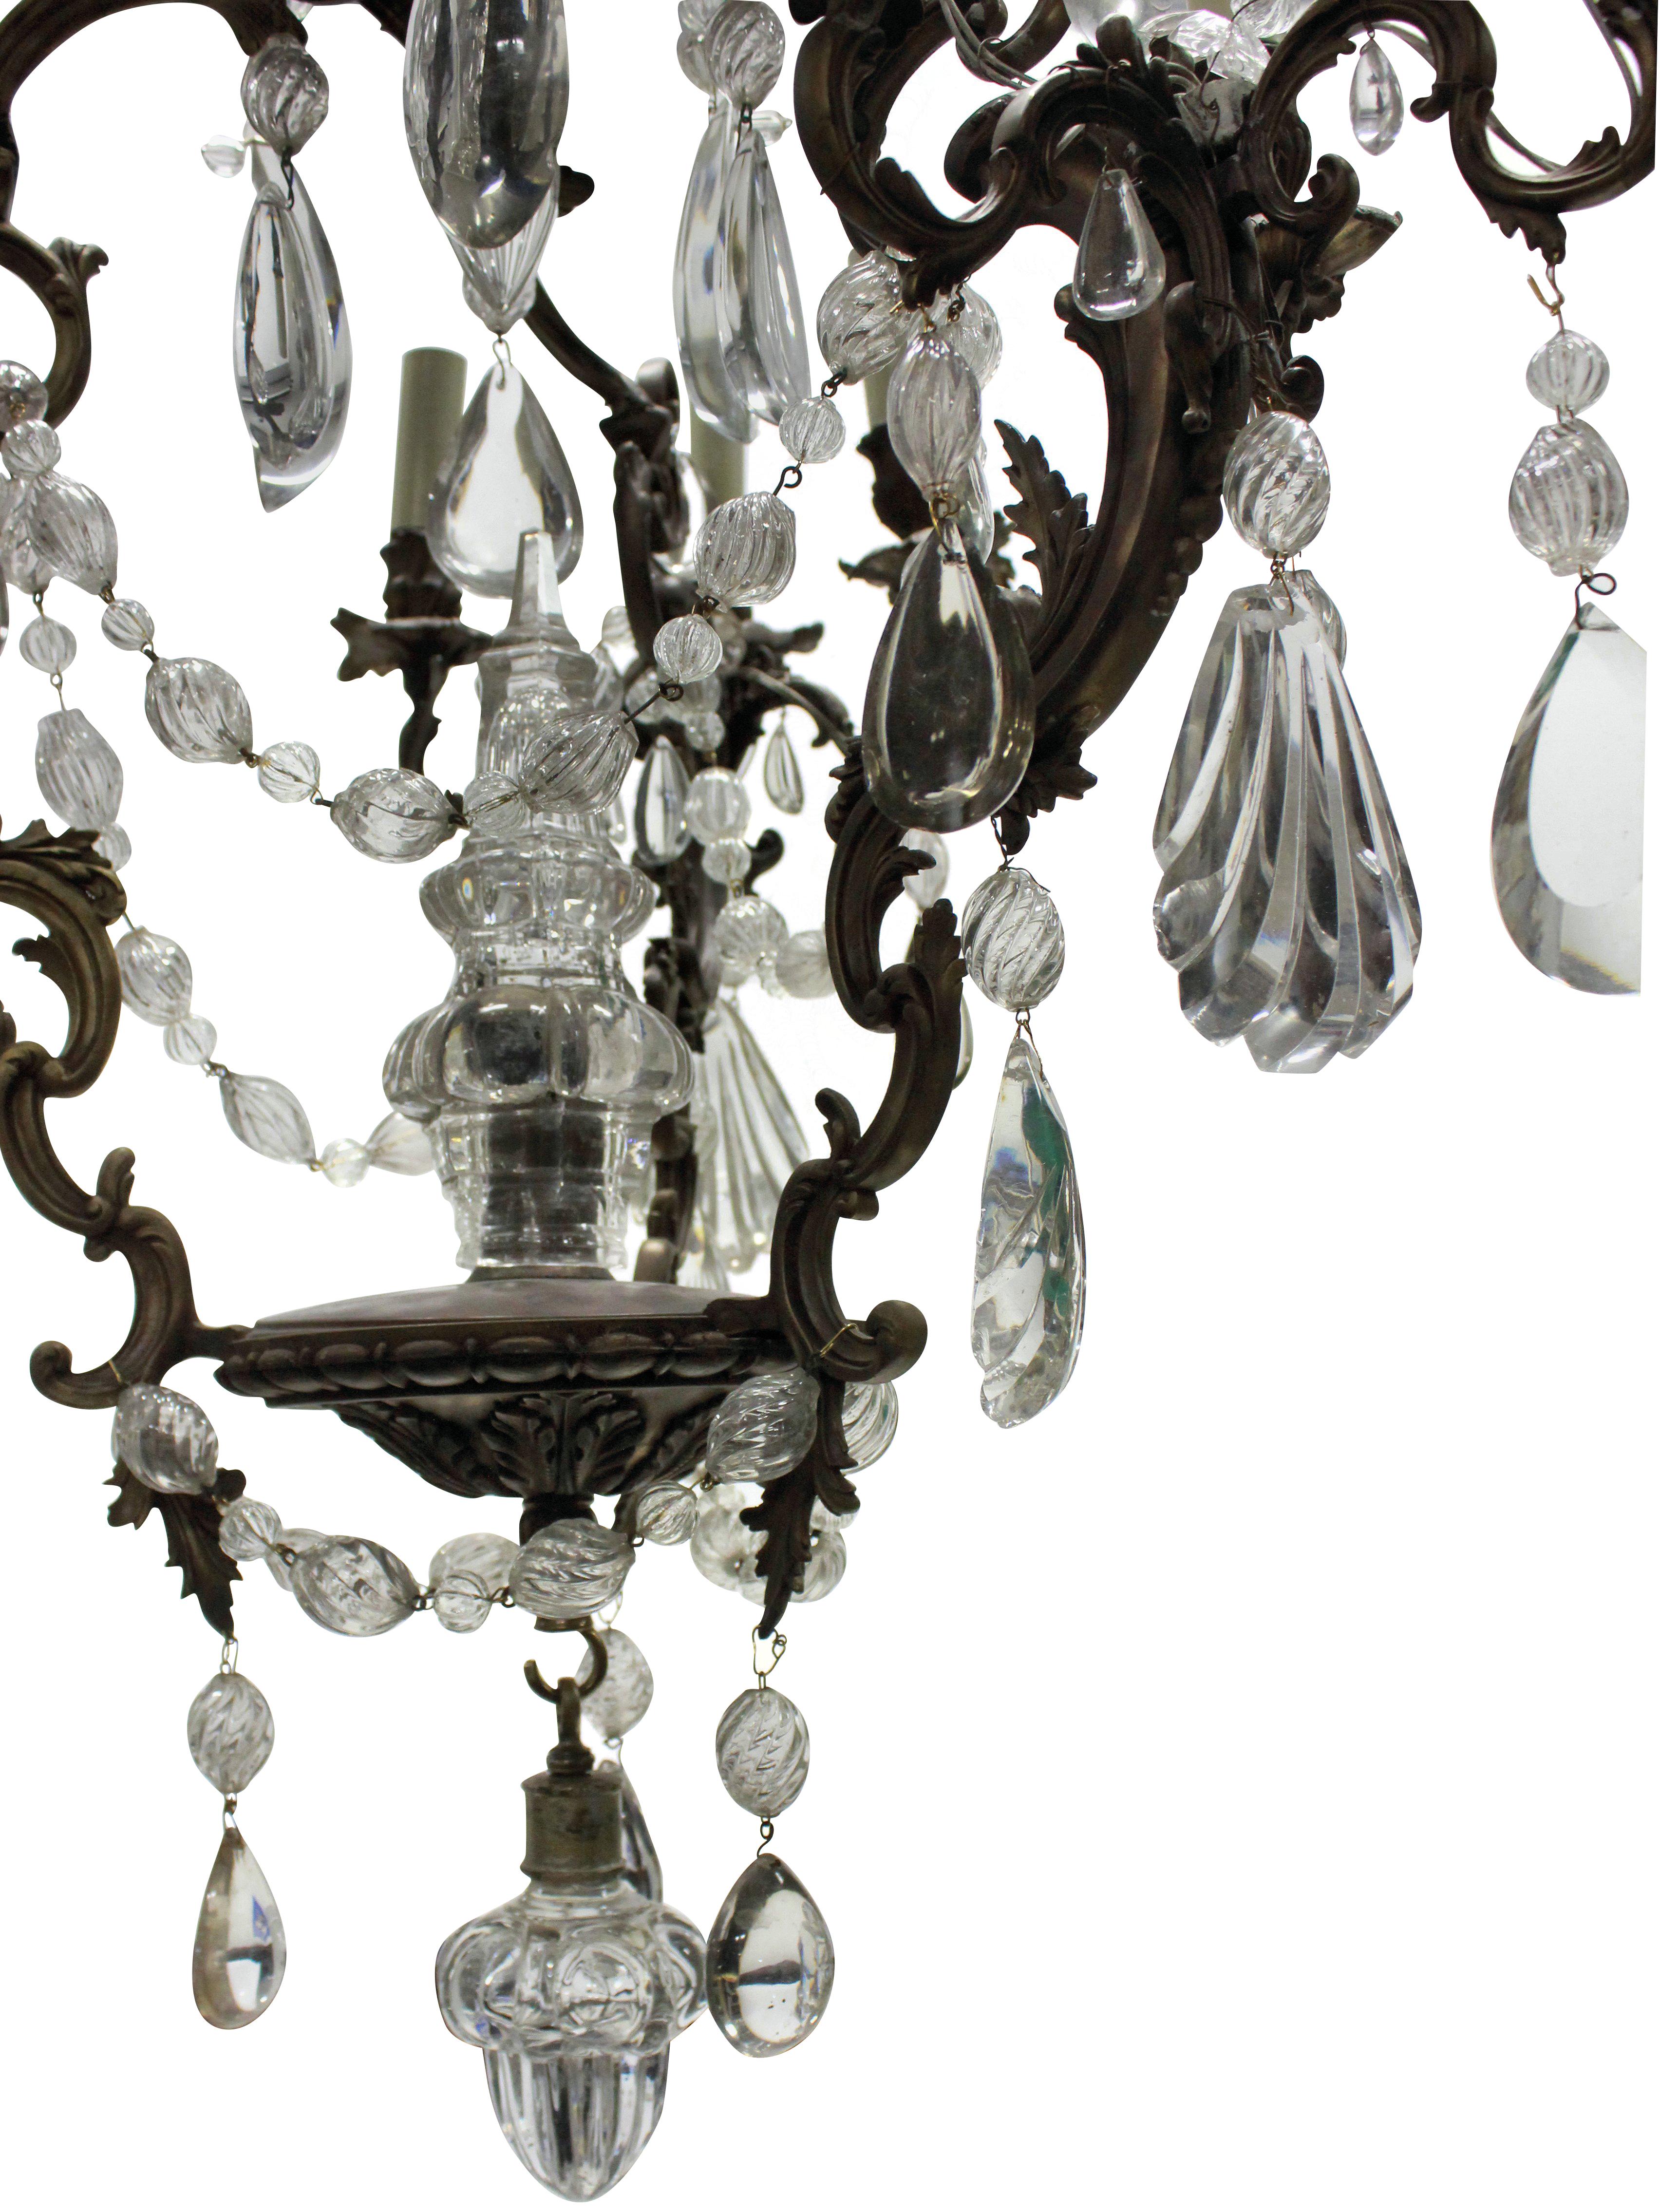 A French Rococo bronze chandelier hung throughout with interesting cut and blown glass drops and swags with a central spire.